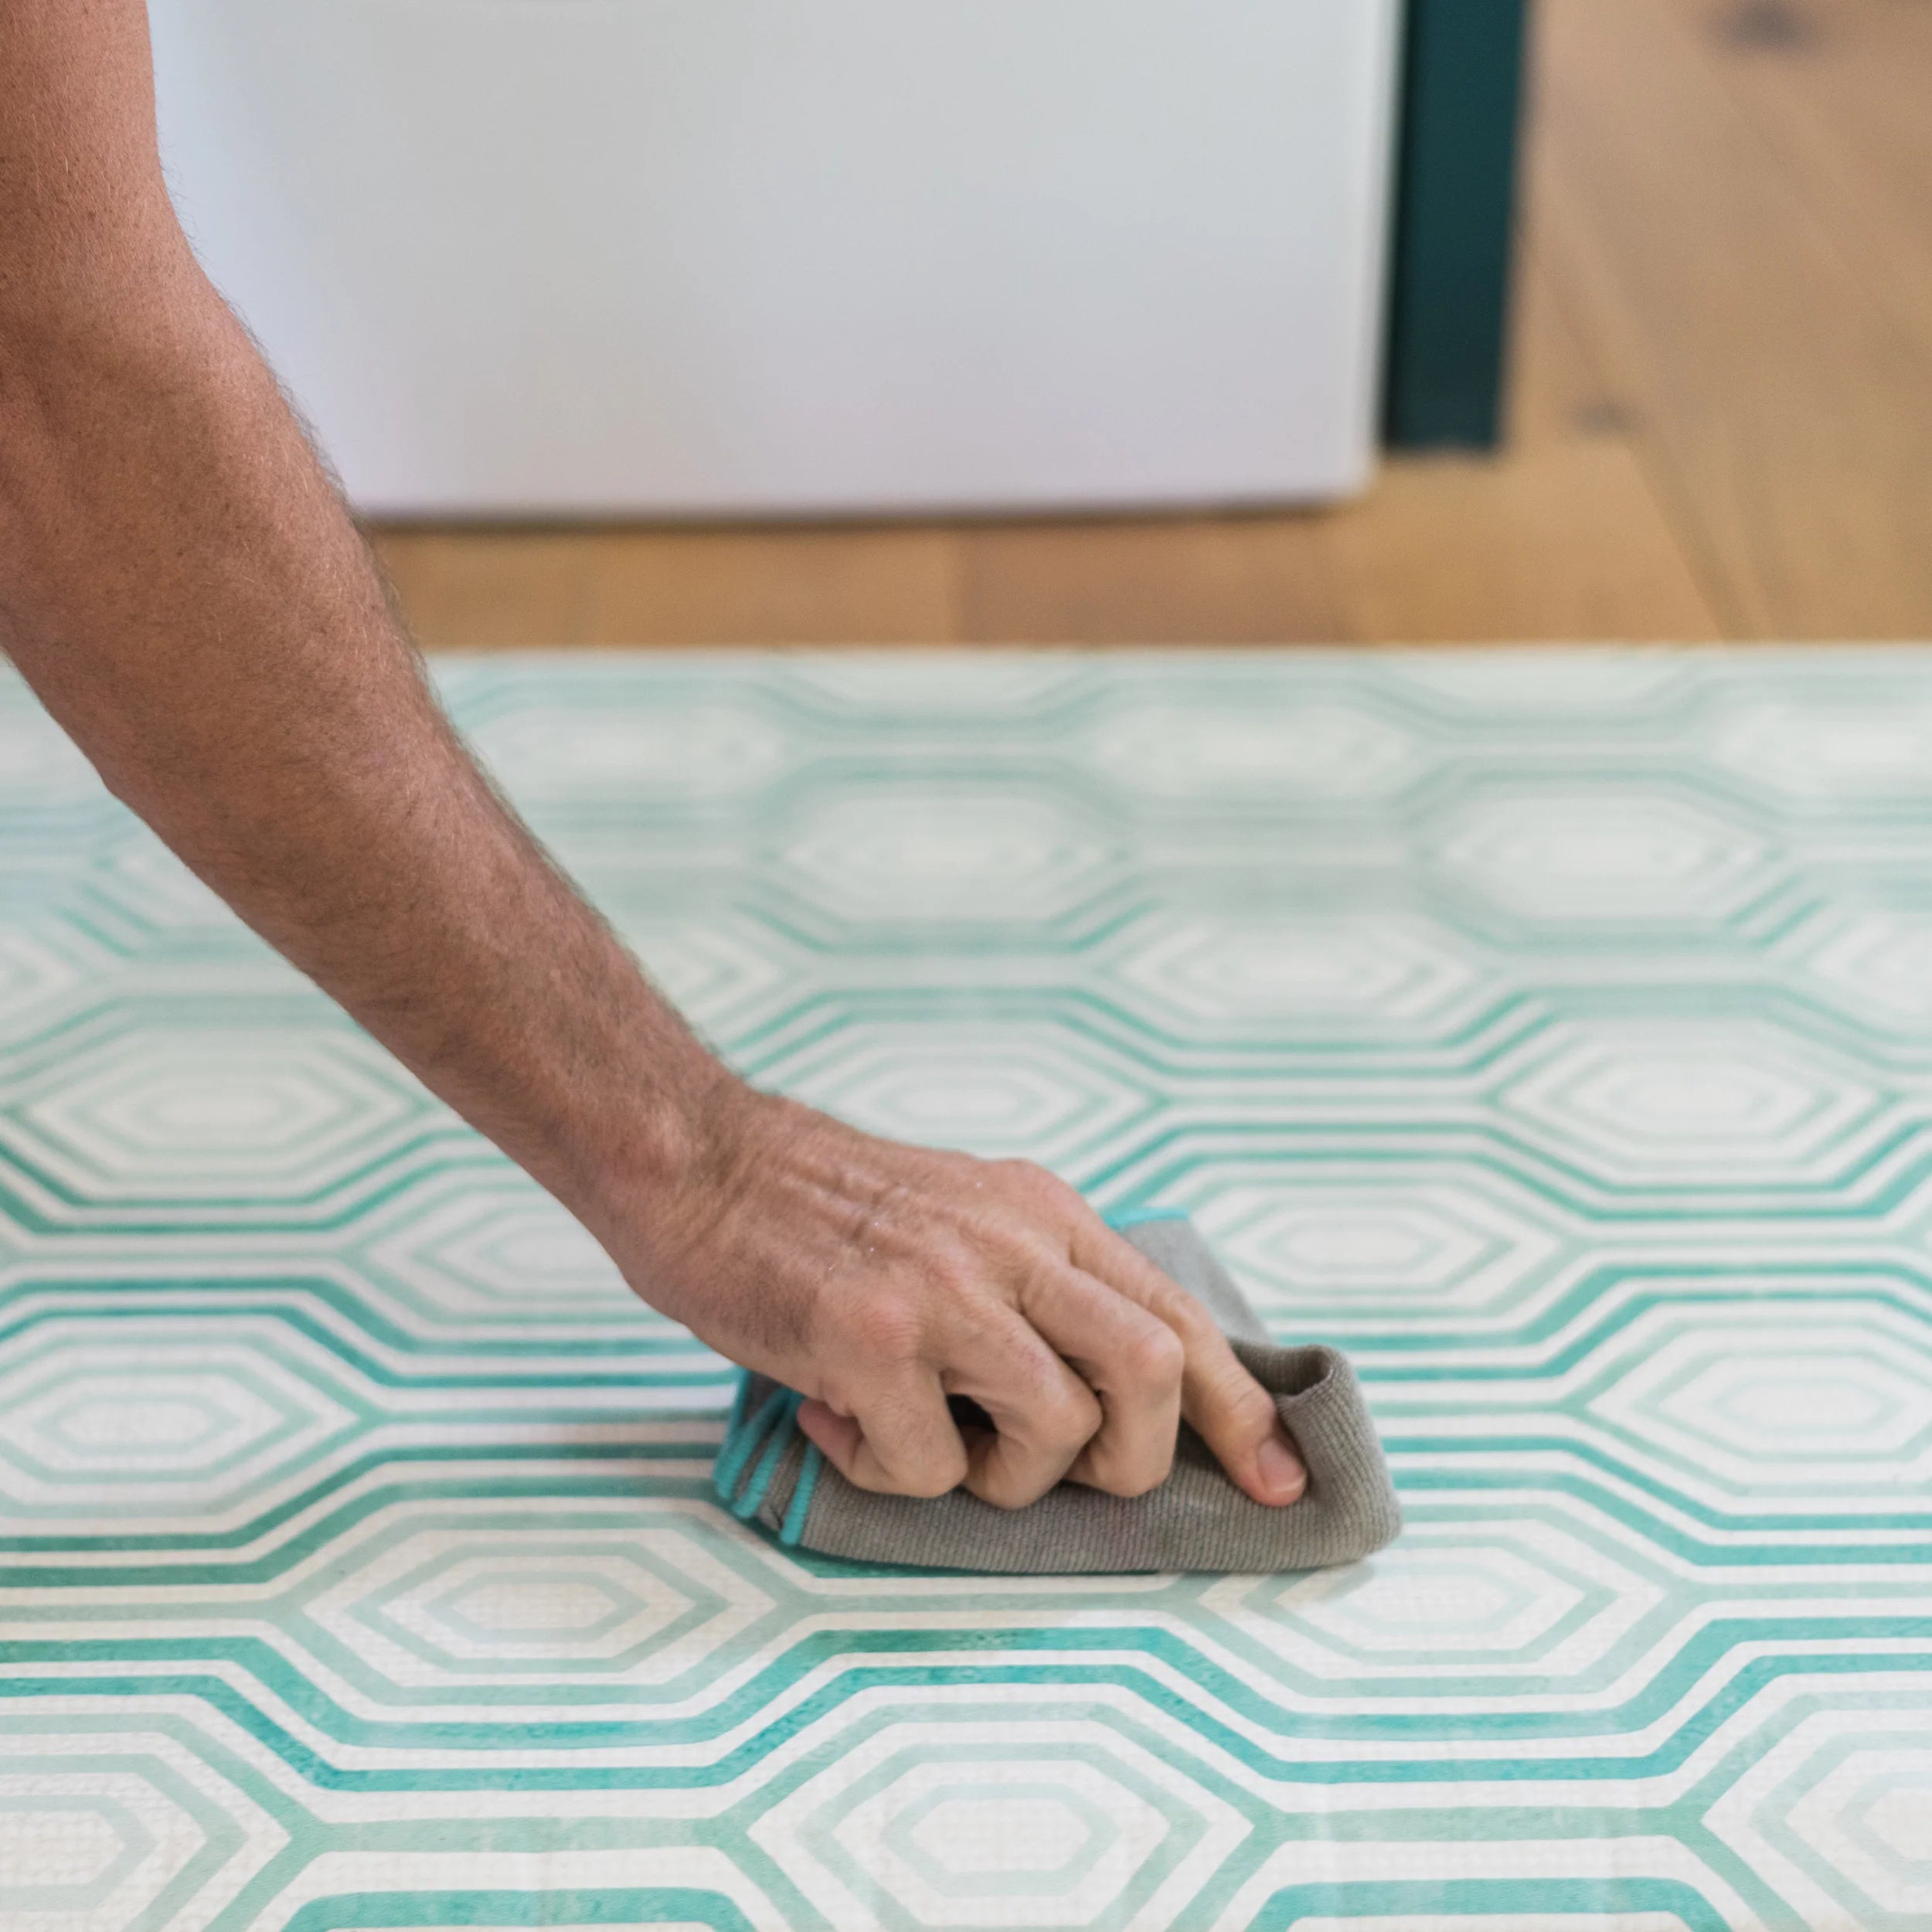 Blake soft emerald green geometric print kitchen mat with man's hand wiping up a spill